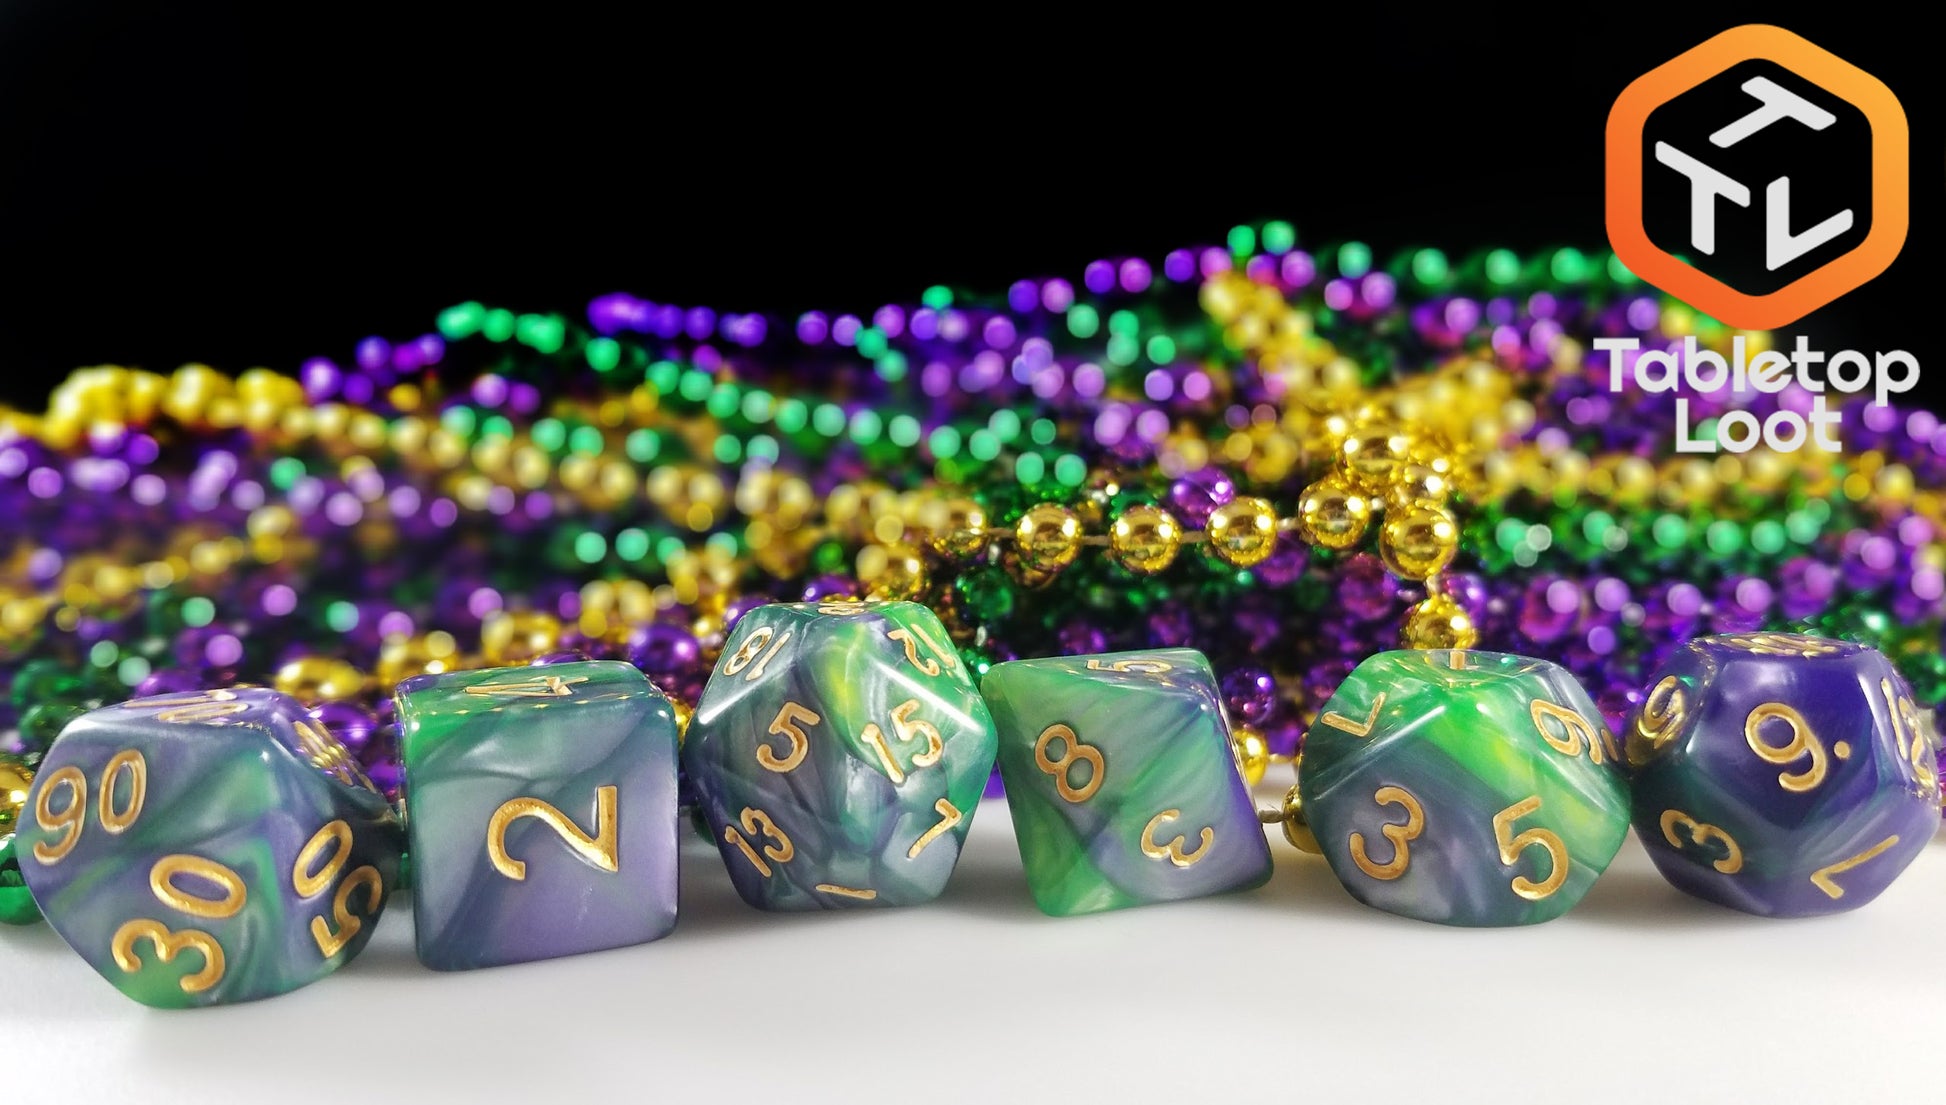 The Commune with Nature 7 piece dice set from Tabletop Loot with swirls of green and purple and gold numbering.